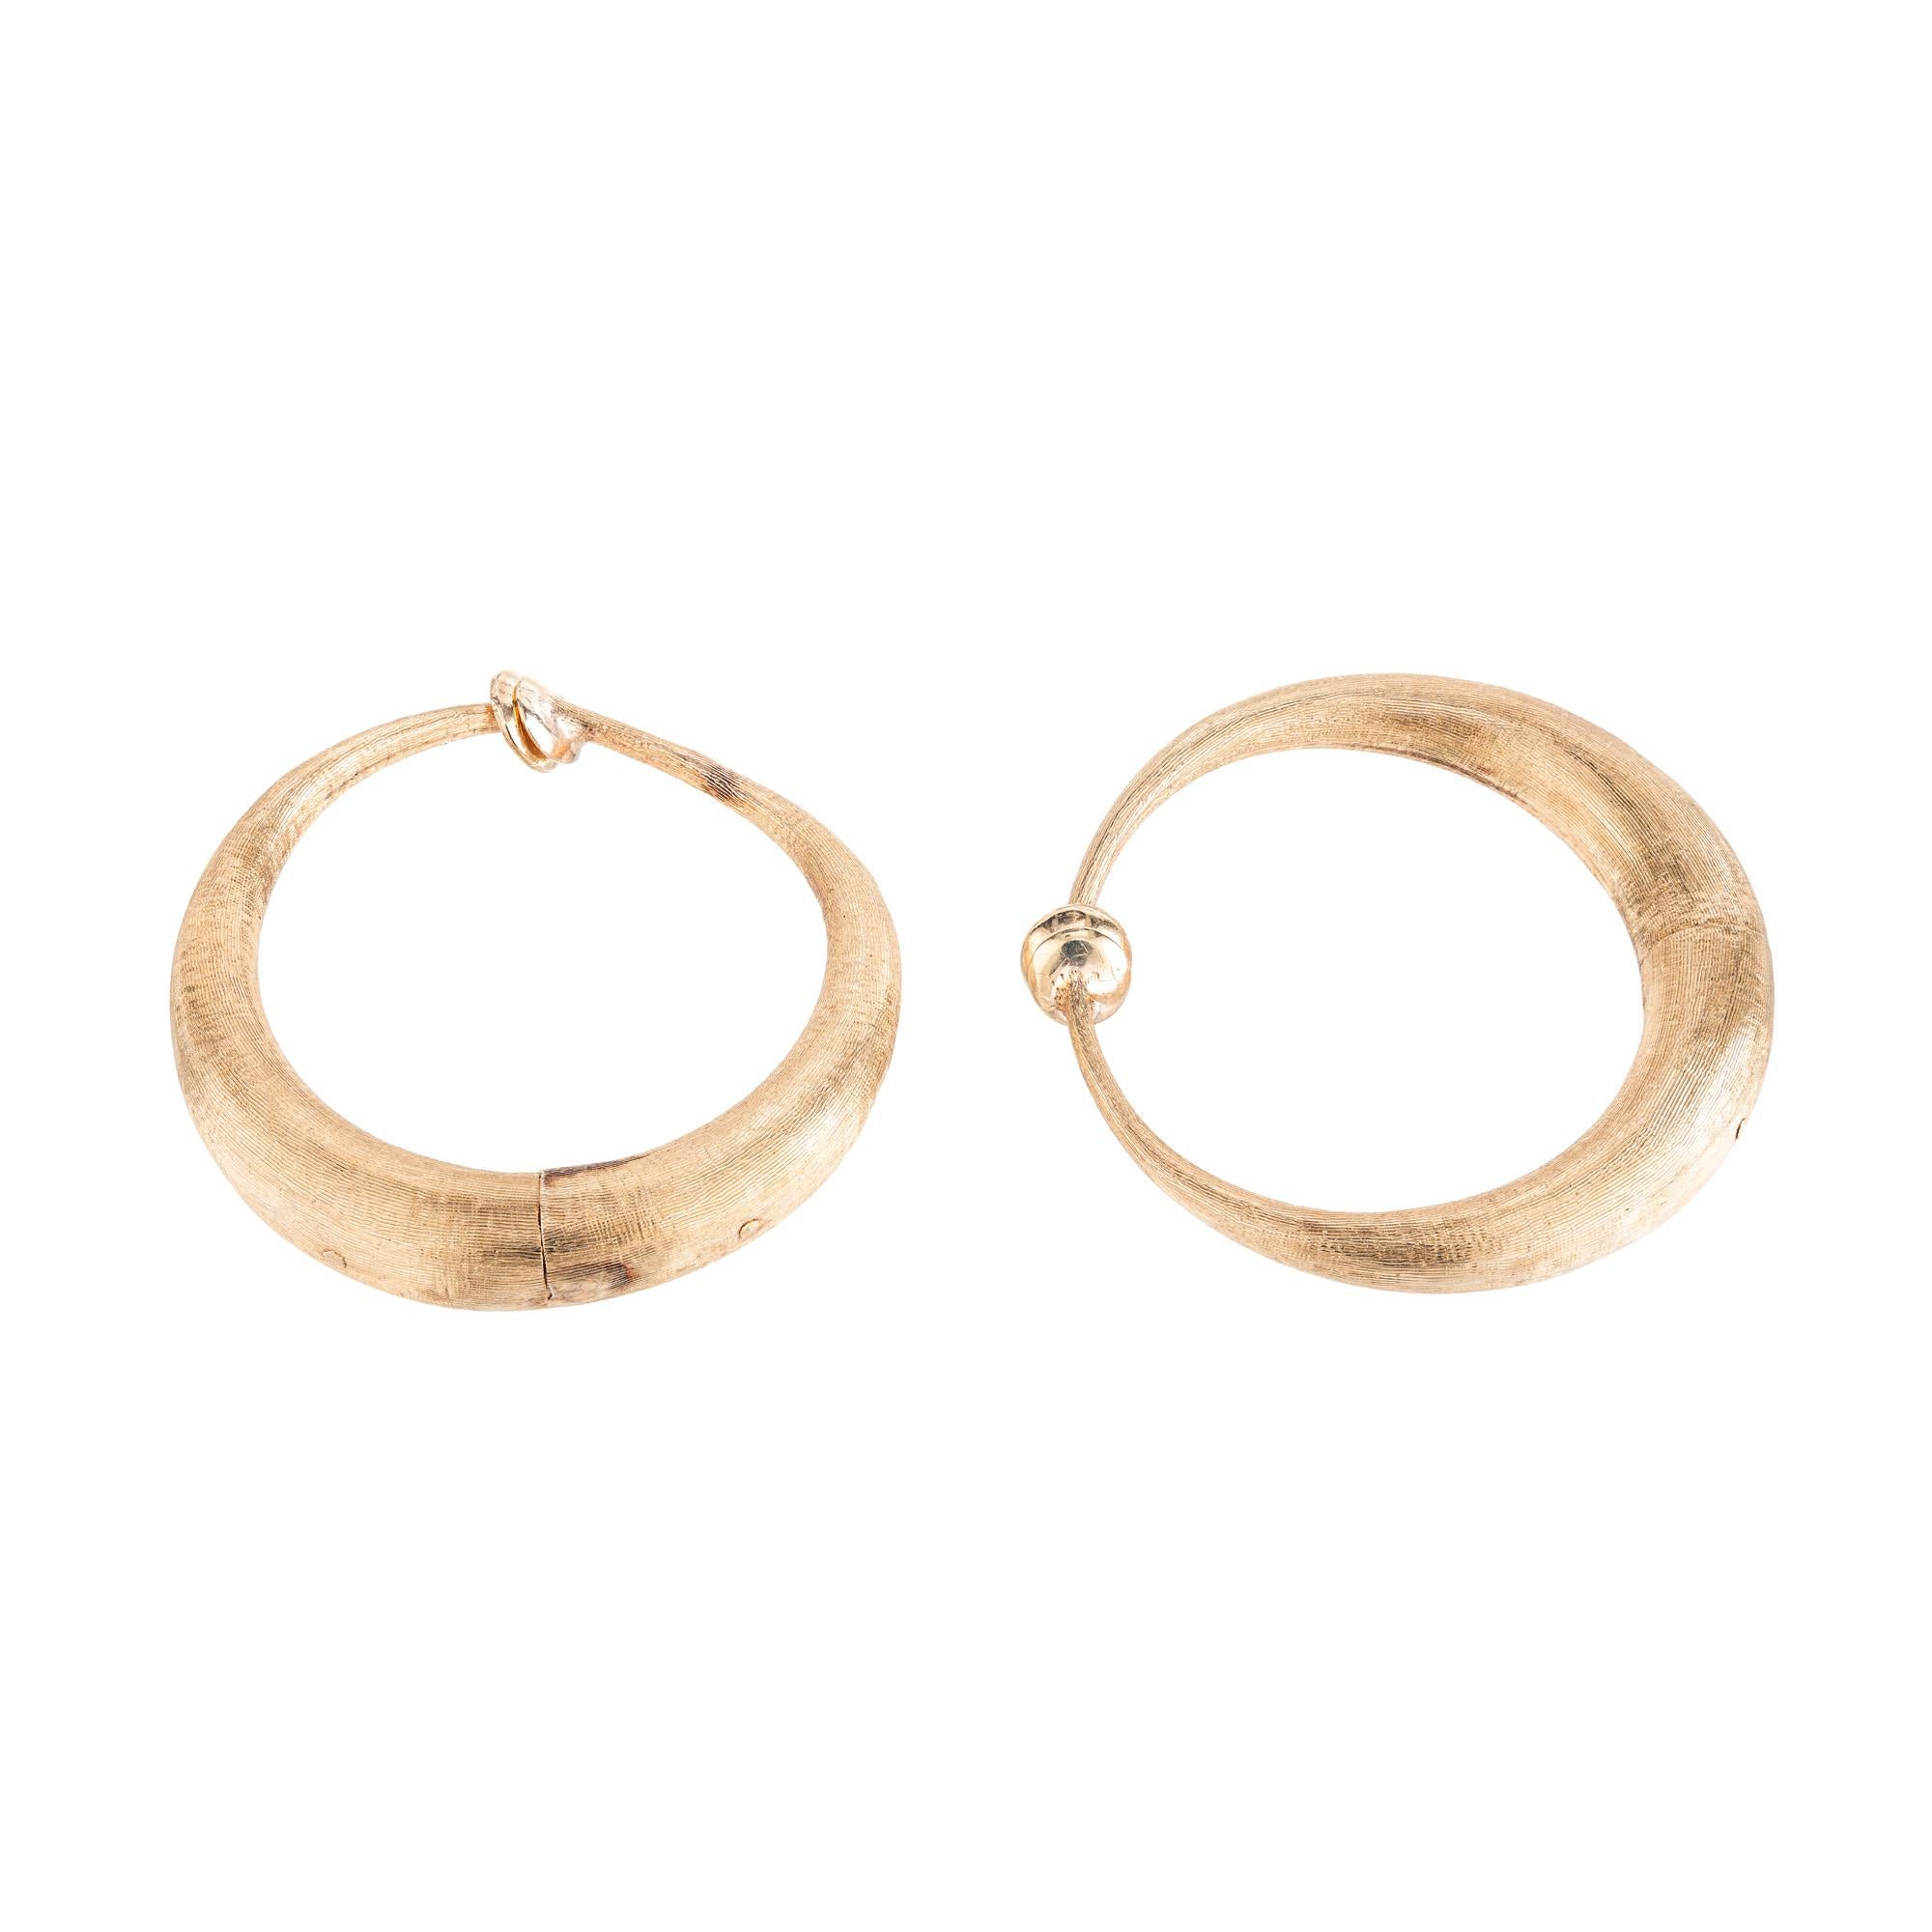 These 1950's 14k yellow gold Florentine crescent non-pierced hoop earrings are the epitome of sophisticated style perfect for anyone to add to their everyday look or dress up for a special event. These earrings are well made with secure pads that